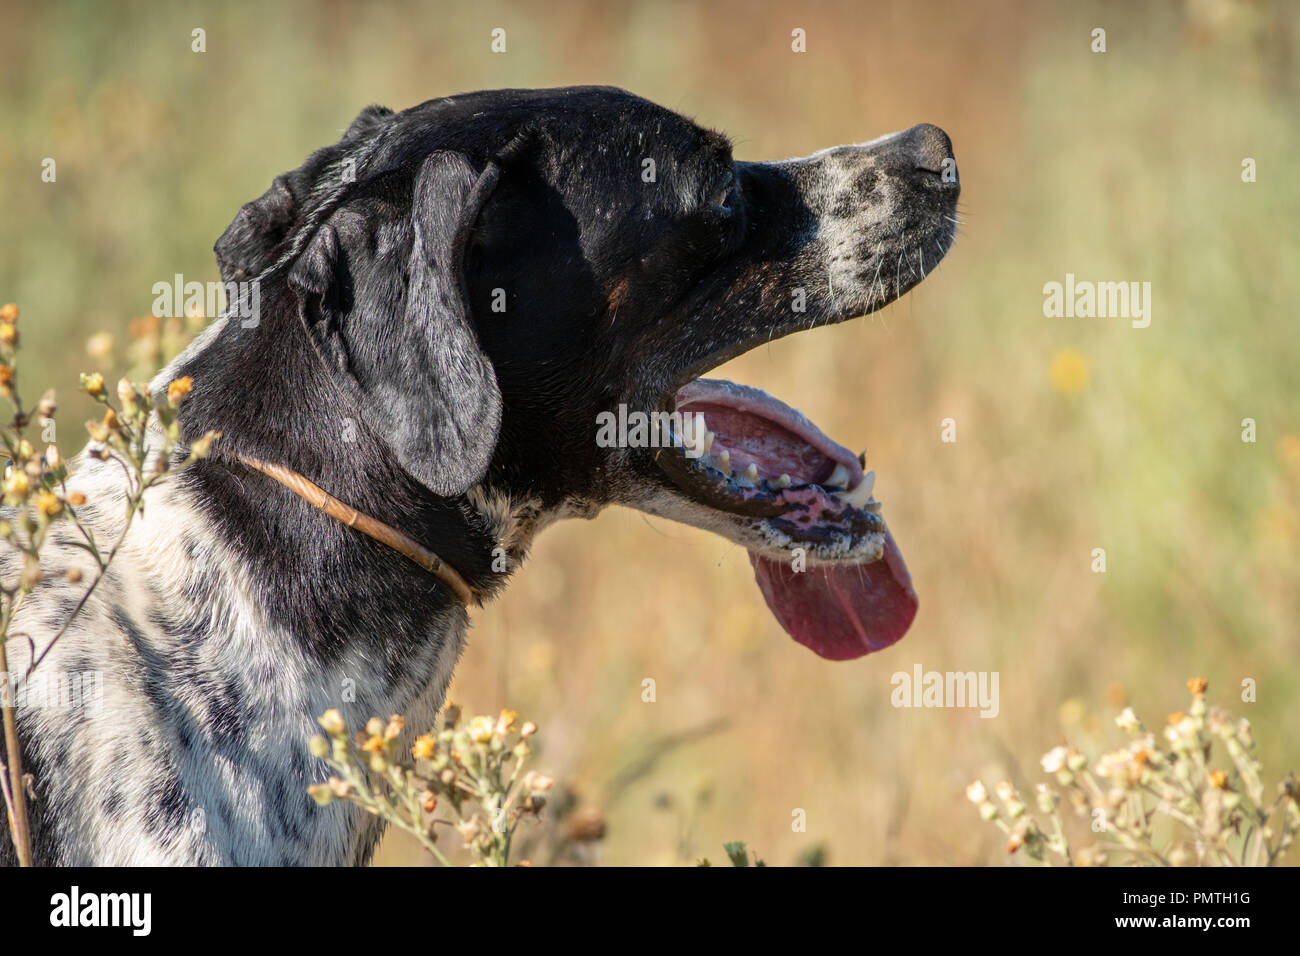 Profile view of Pointer dog with black head and tongue out Stock Photo